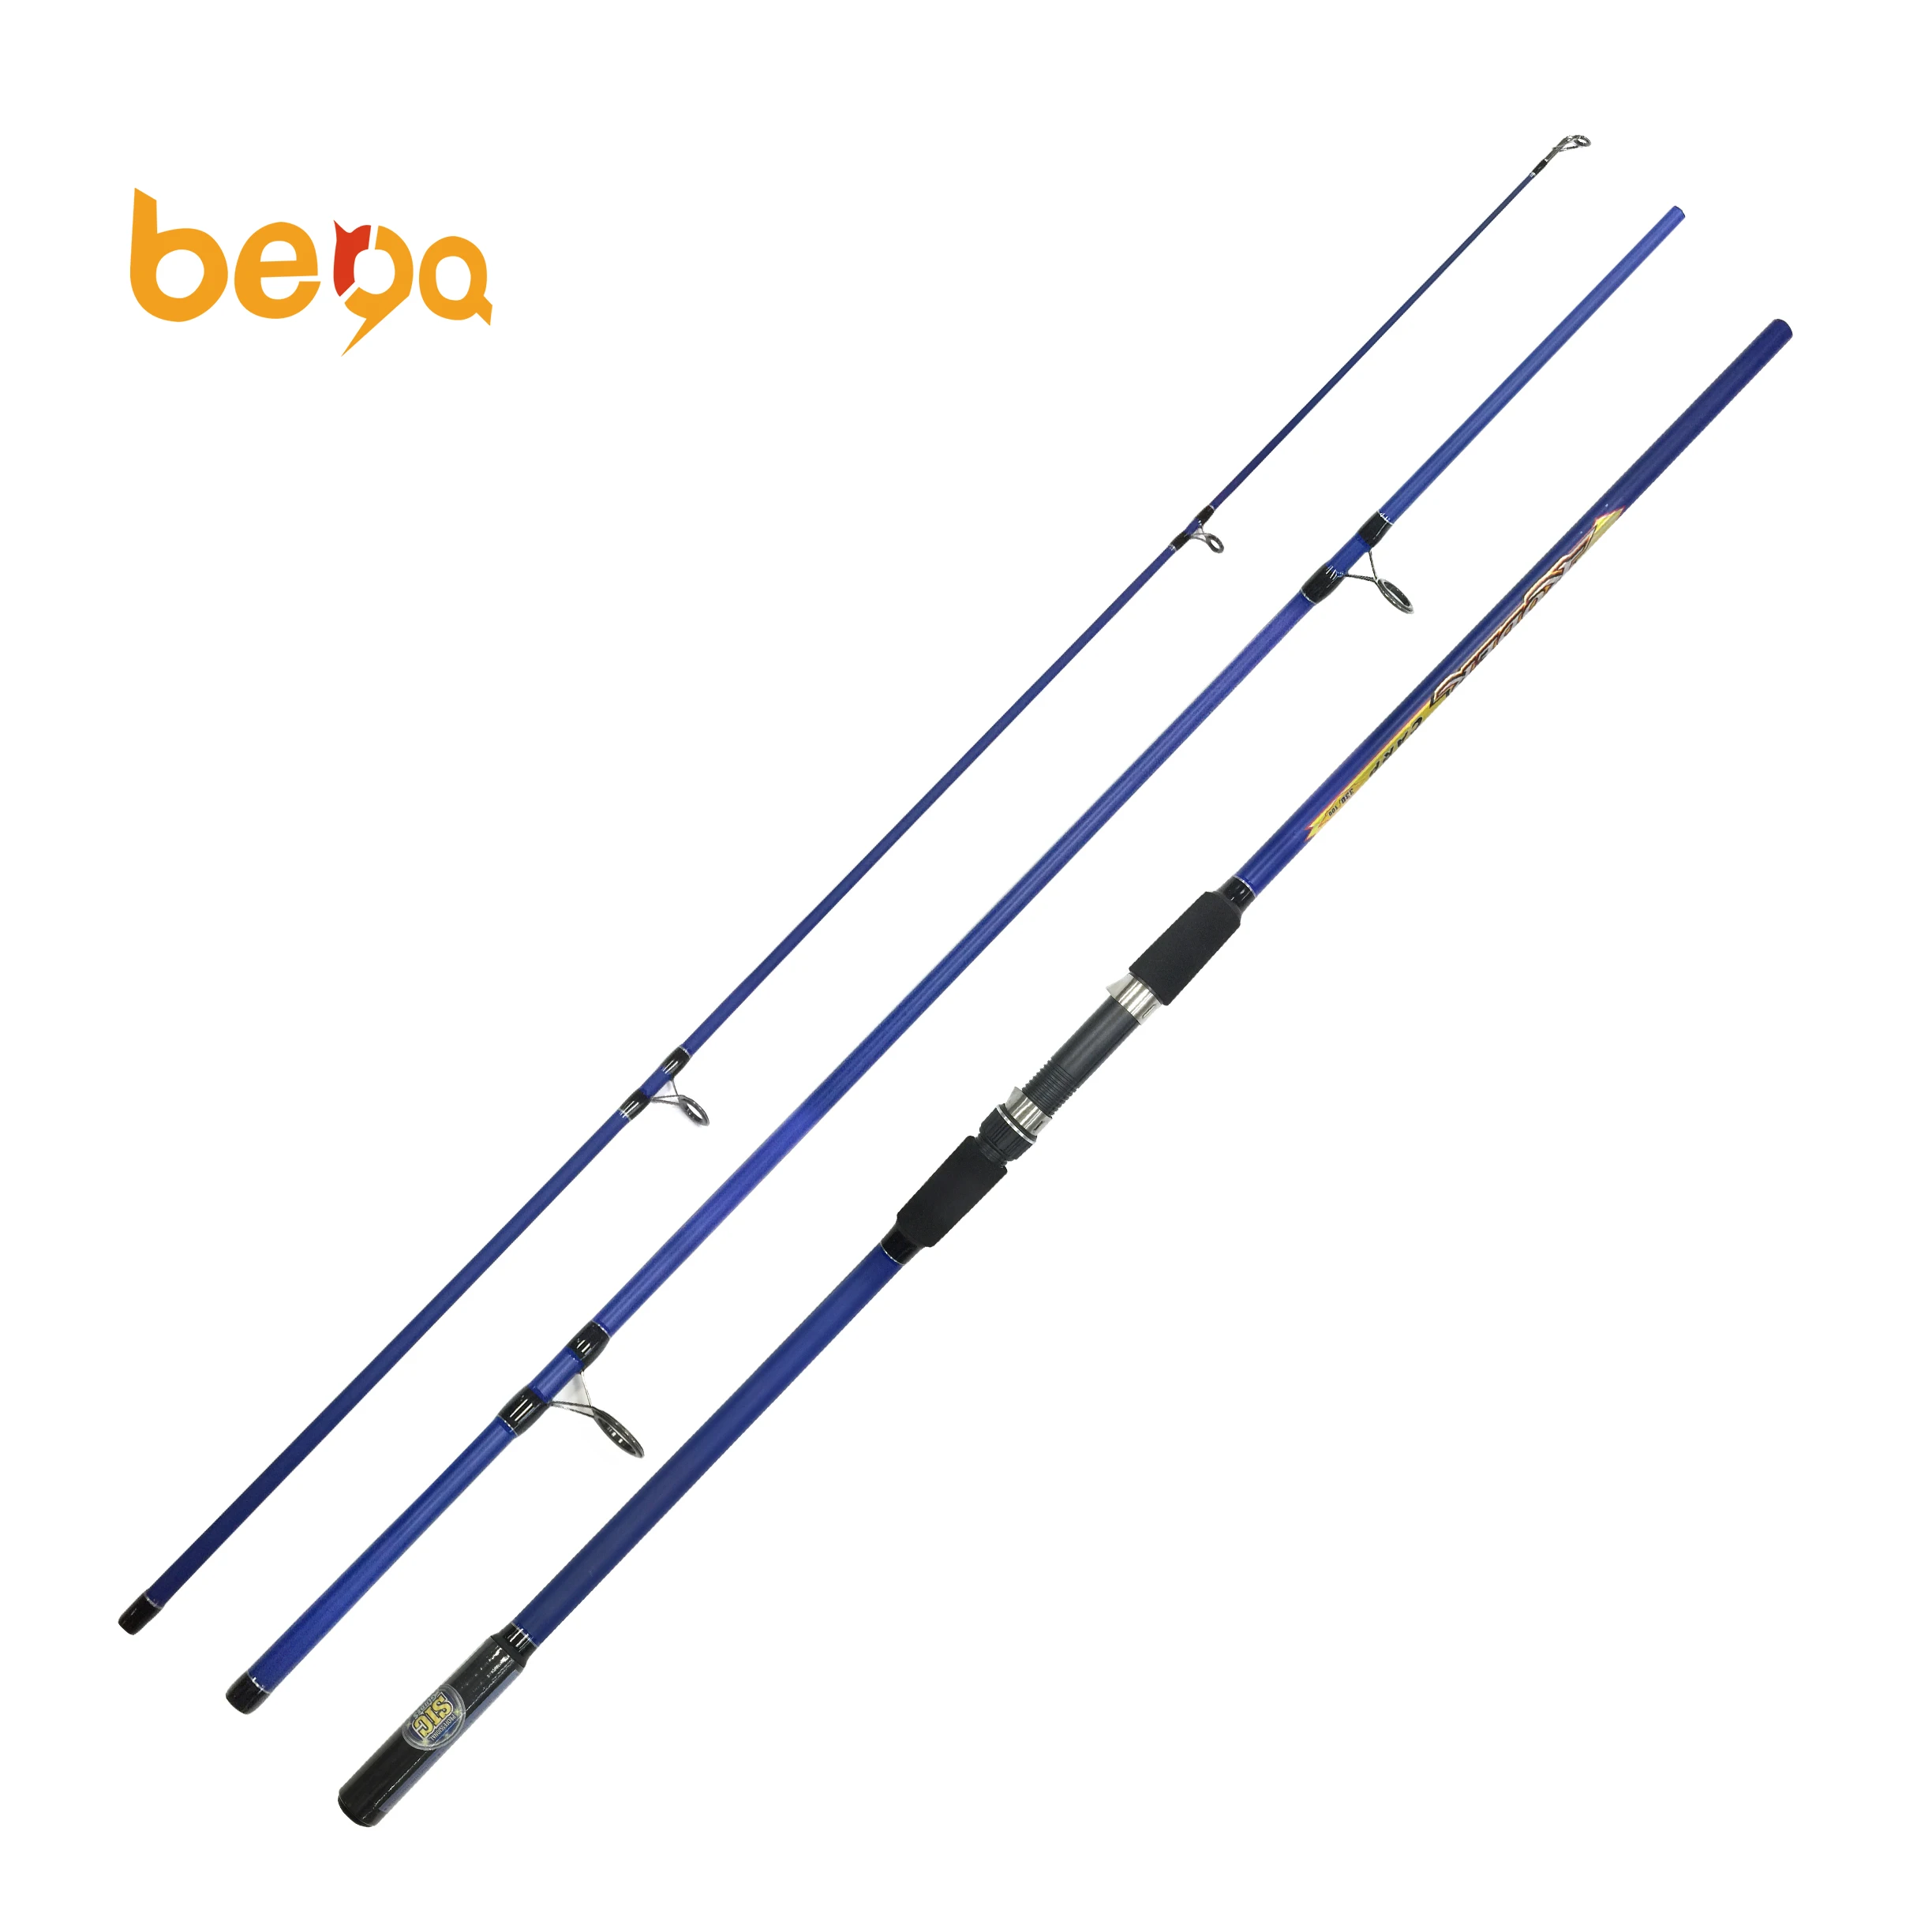 

Blue color 3.0m-4.5m 3 sections Carbon Long Casting Surf Fishing Rod For Big Fish Sea Fishing, Black/white/red/yellow/orange, customizable